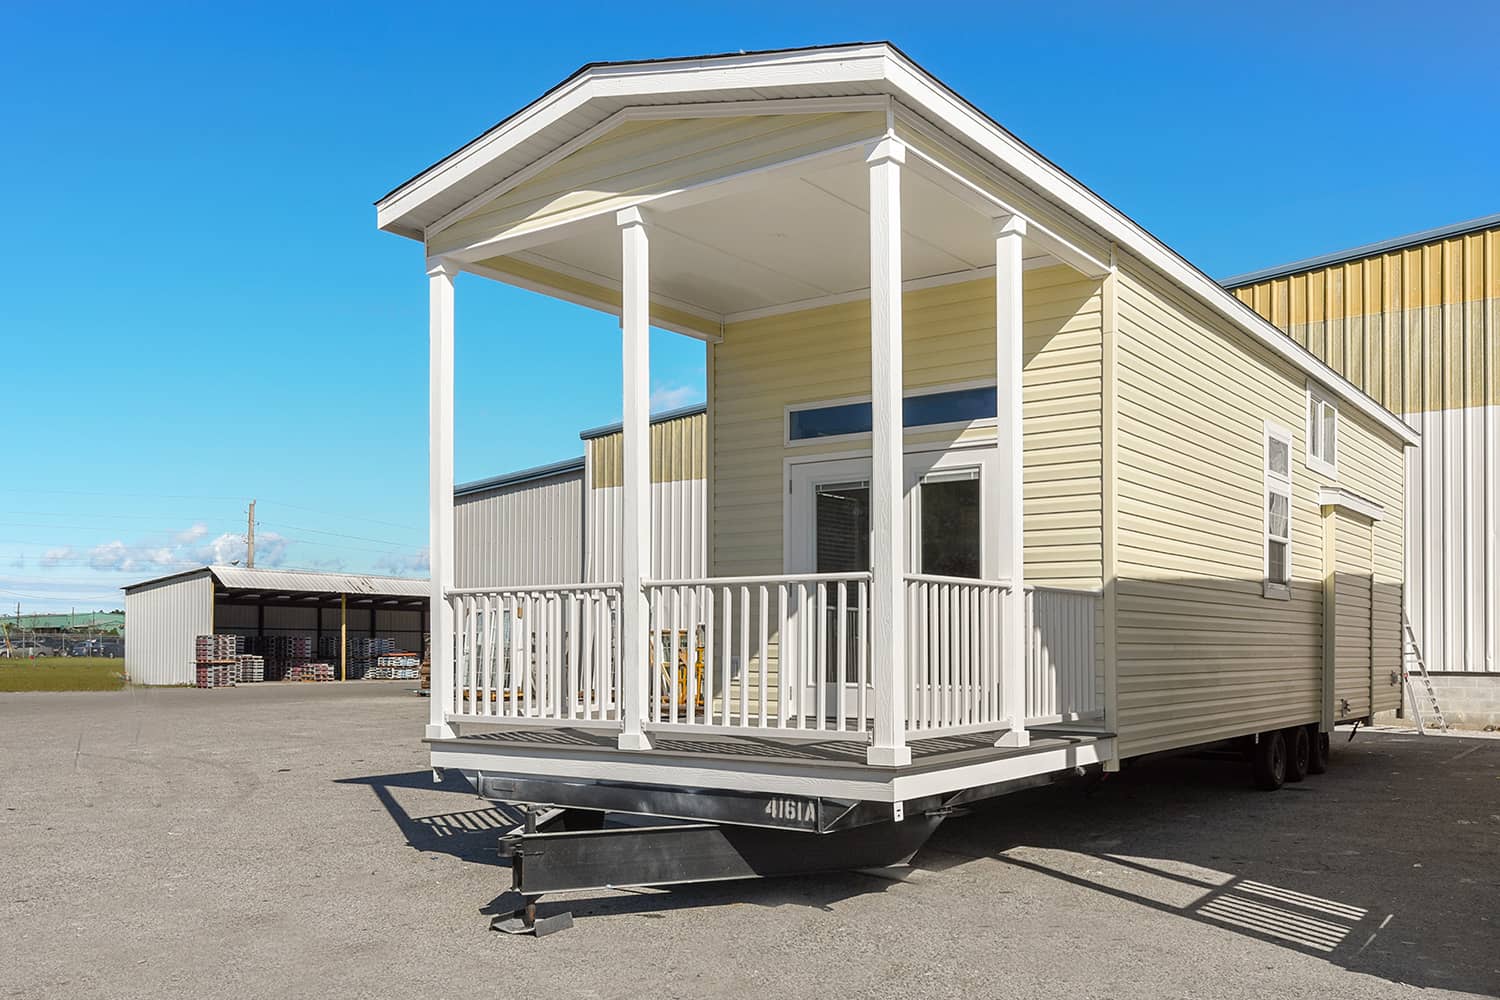 https://www.tinyhomessouth.com/wp-content/uploads/2021/01/lakeview-bg.jpg